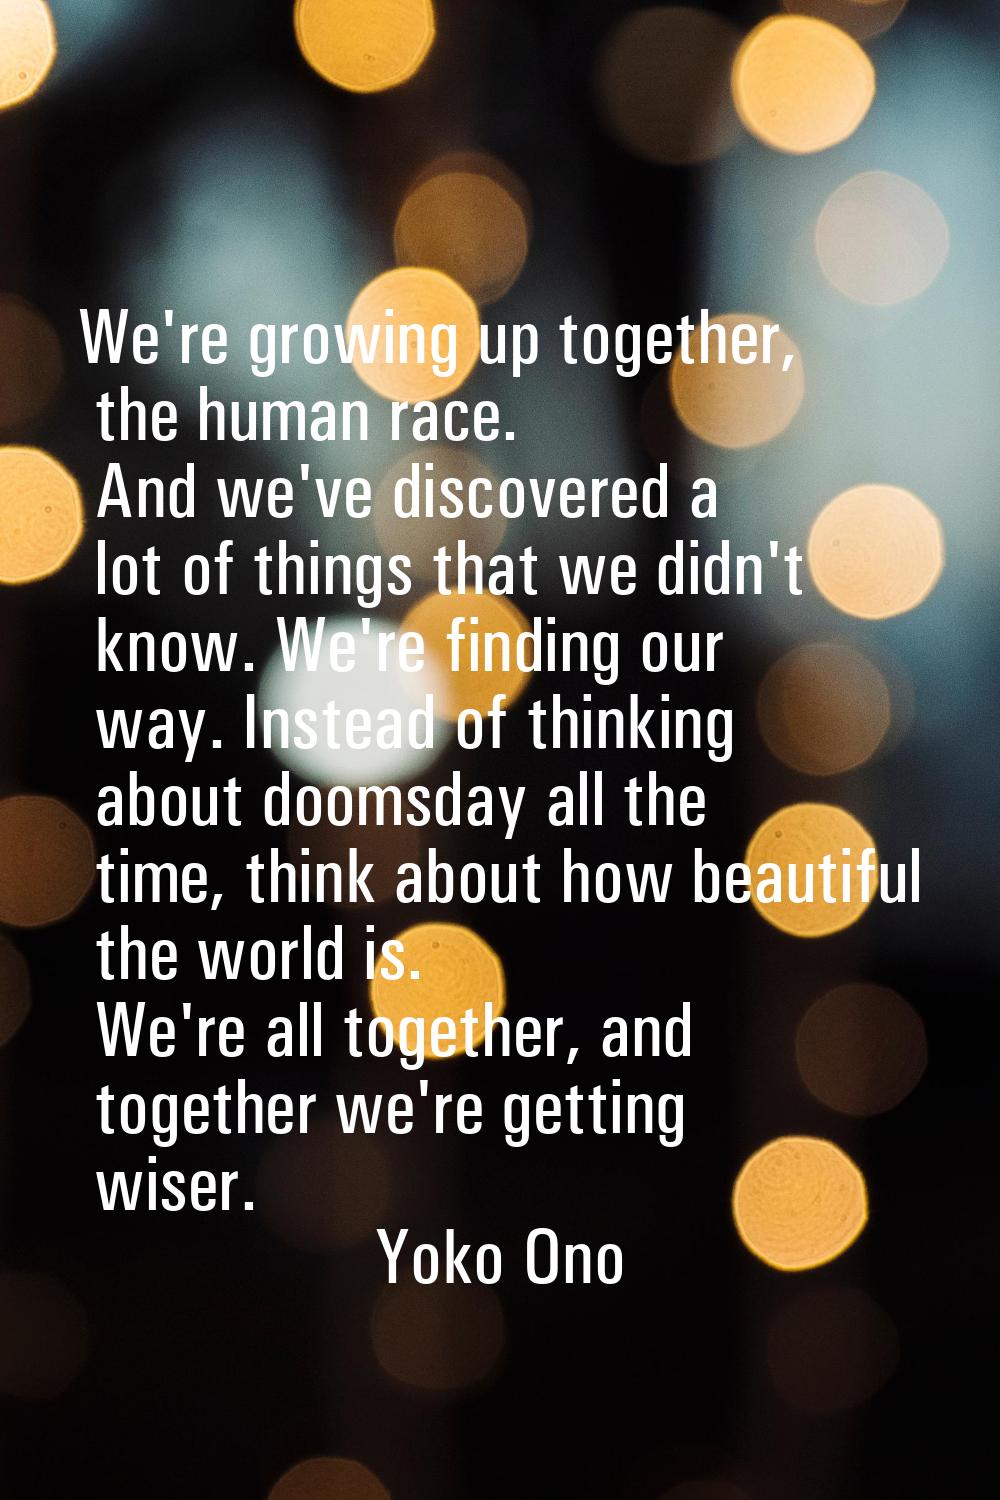 We're growing up together, the human race. And we've discovered a lot of things that we didn't know